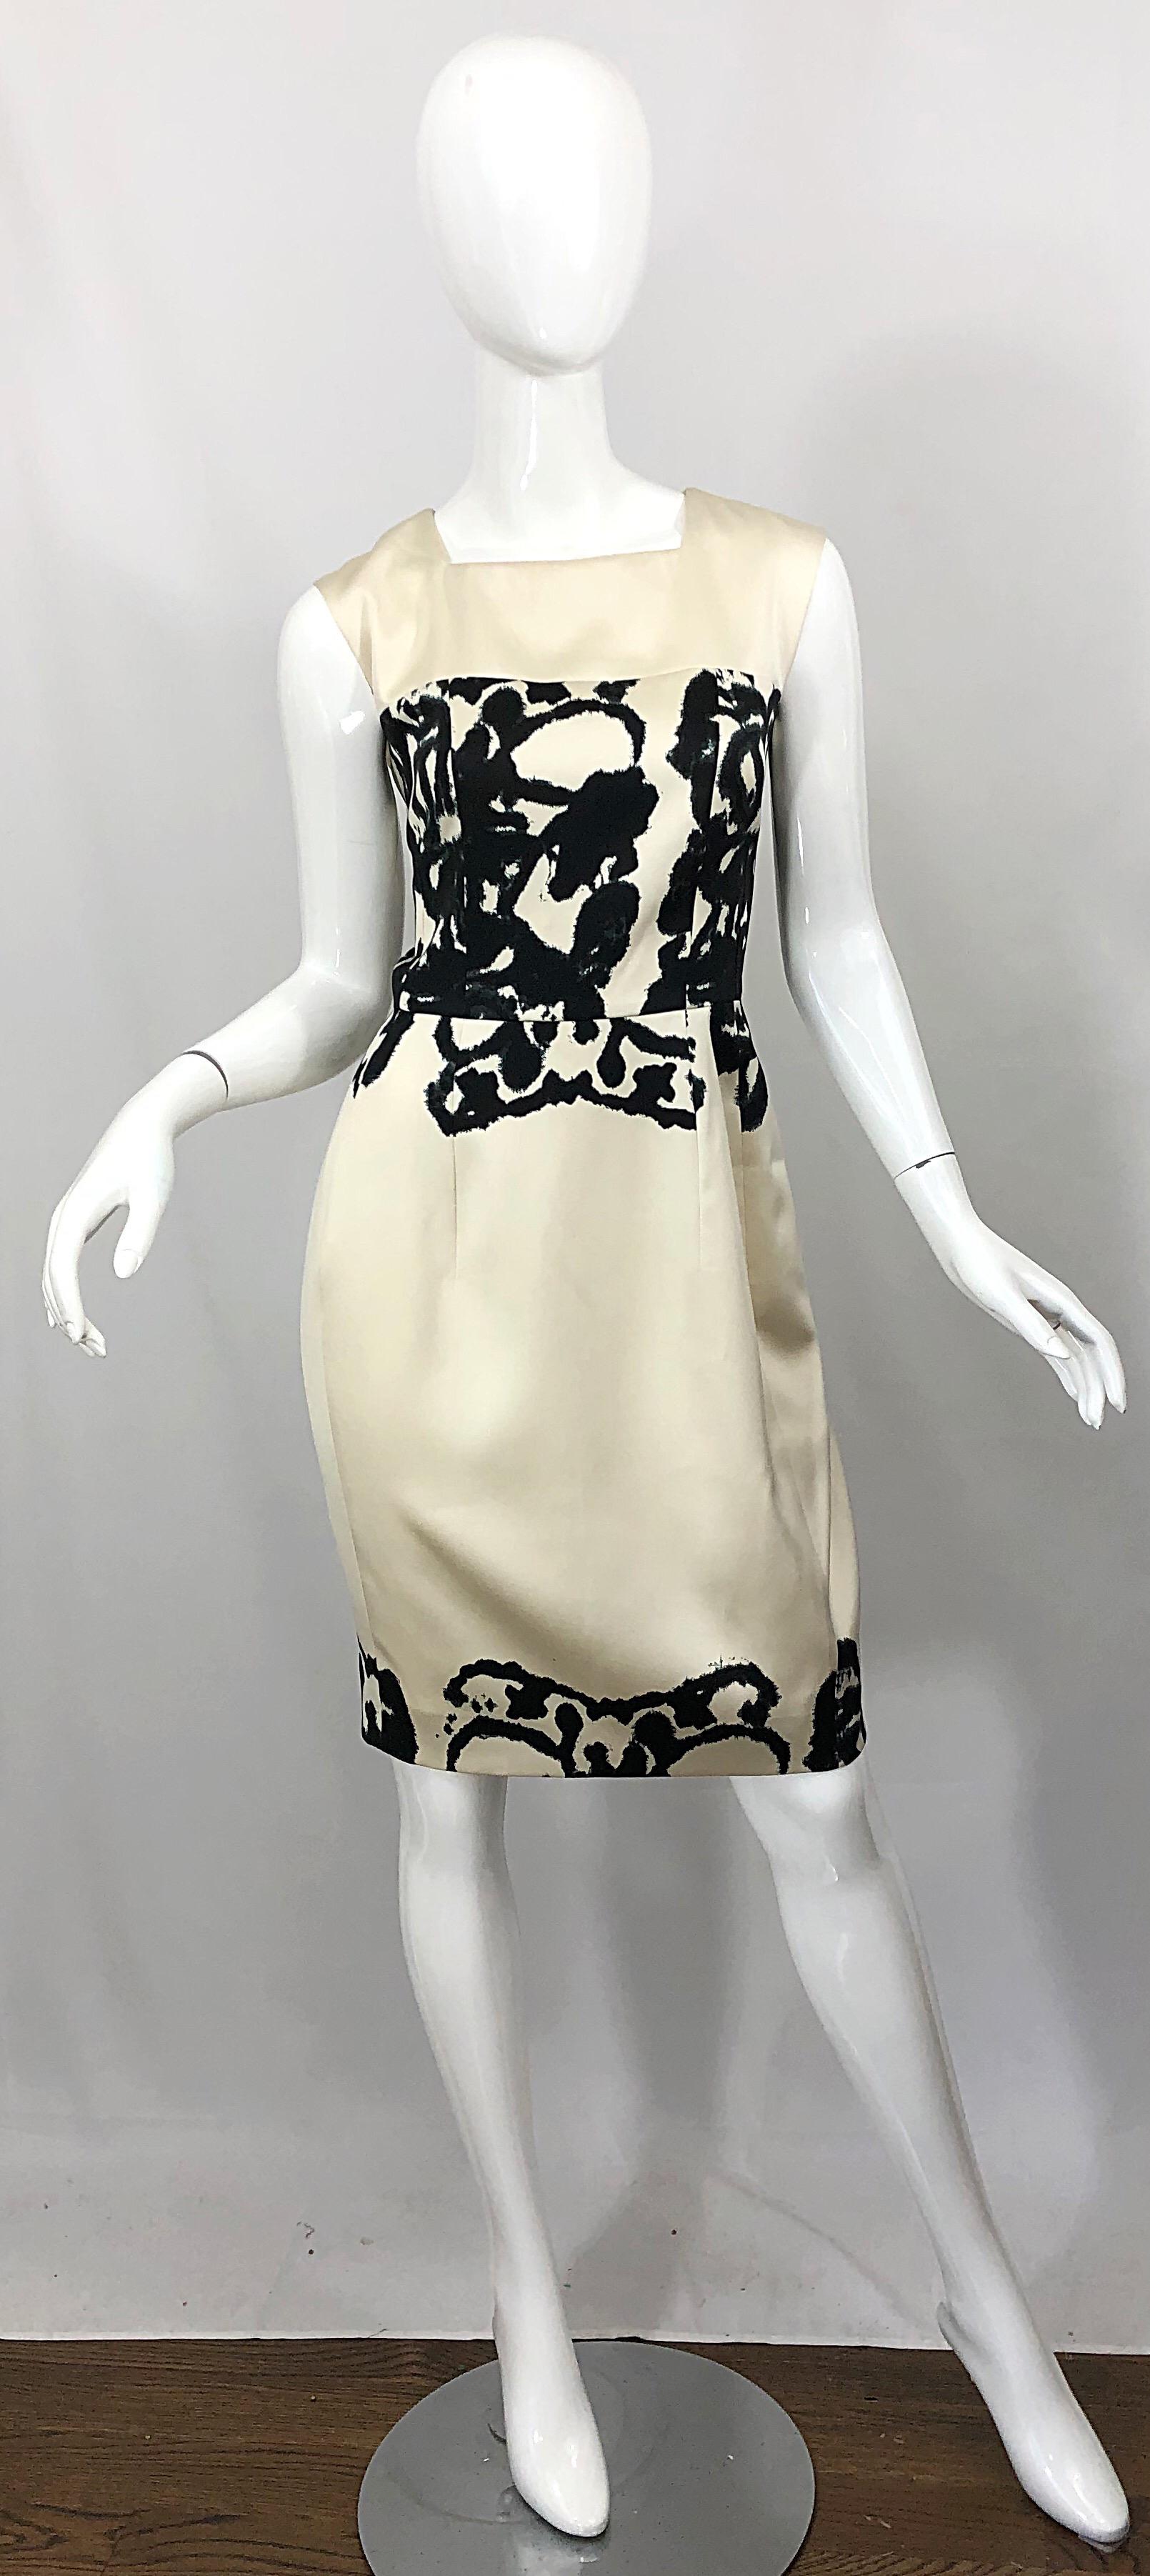 Chic brand new YVES SAINT LAURENT ( YSL ) ivory and black abstract print sleeveless silk dress! Sleek tailored bodice with a square neckline. Abstract black print on the front and back bodice and at bottom hem. Hidden zipper up the back with